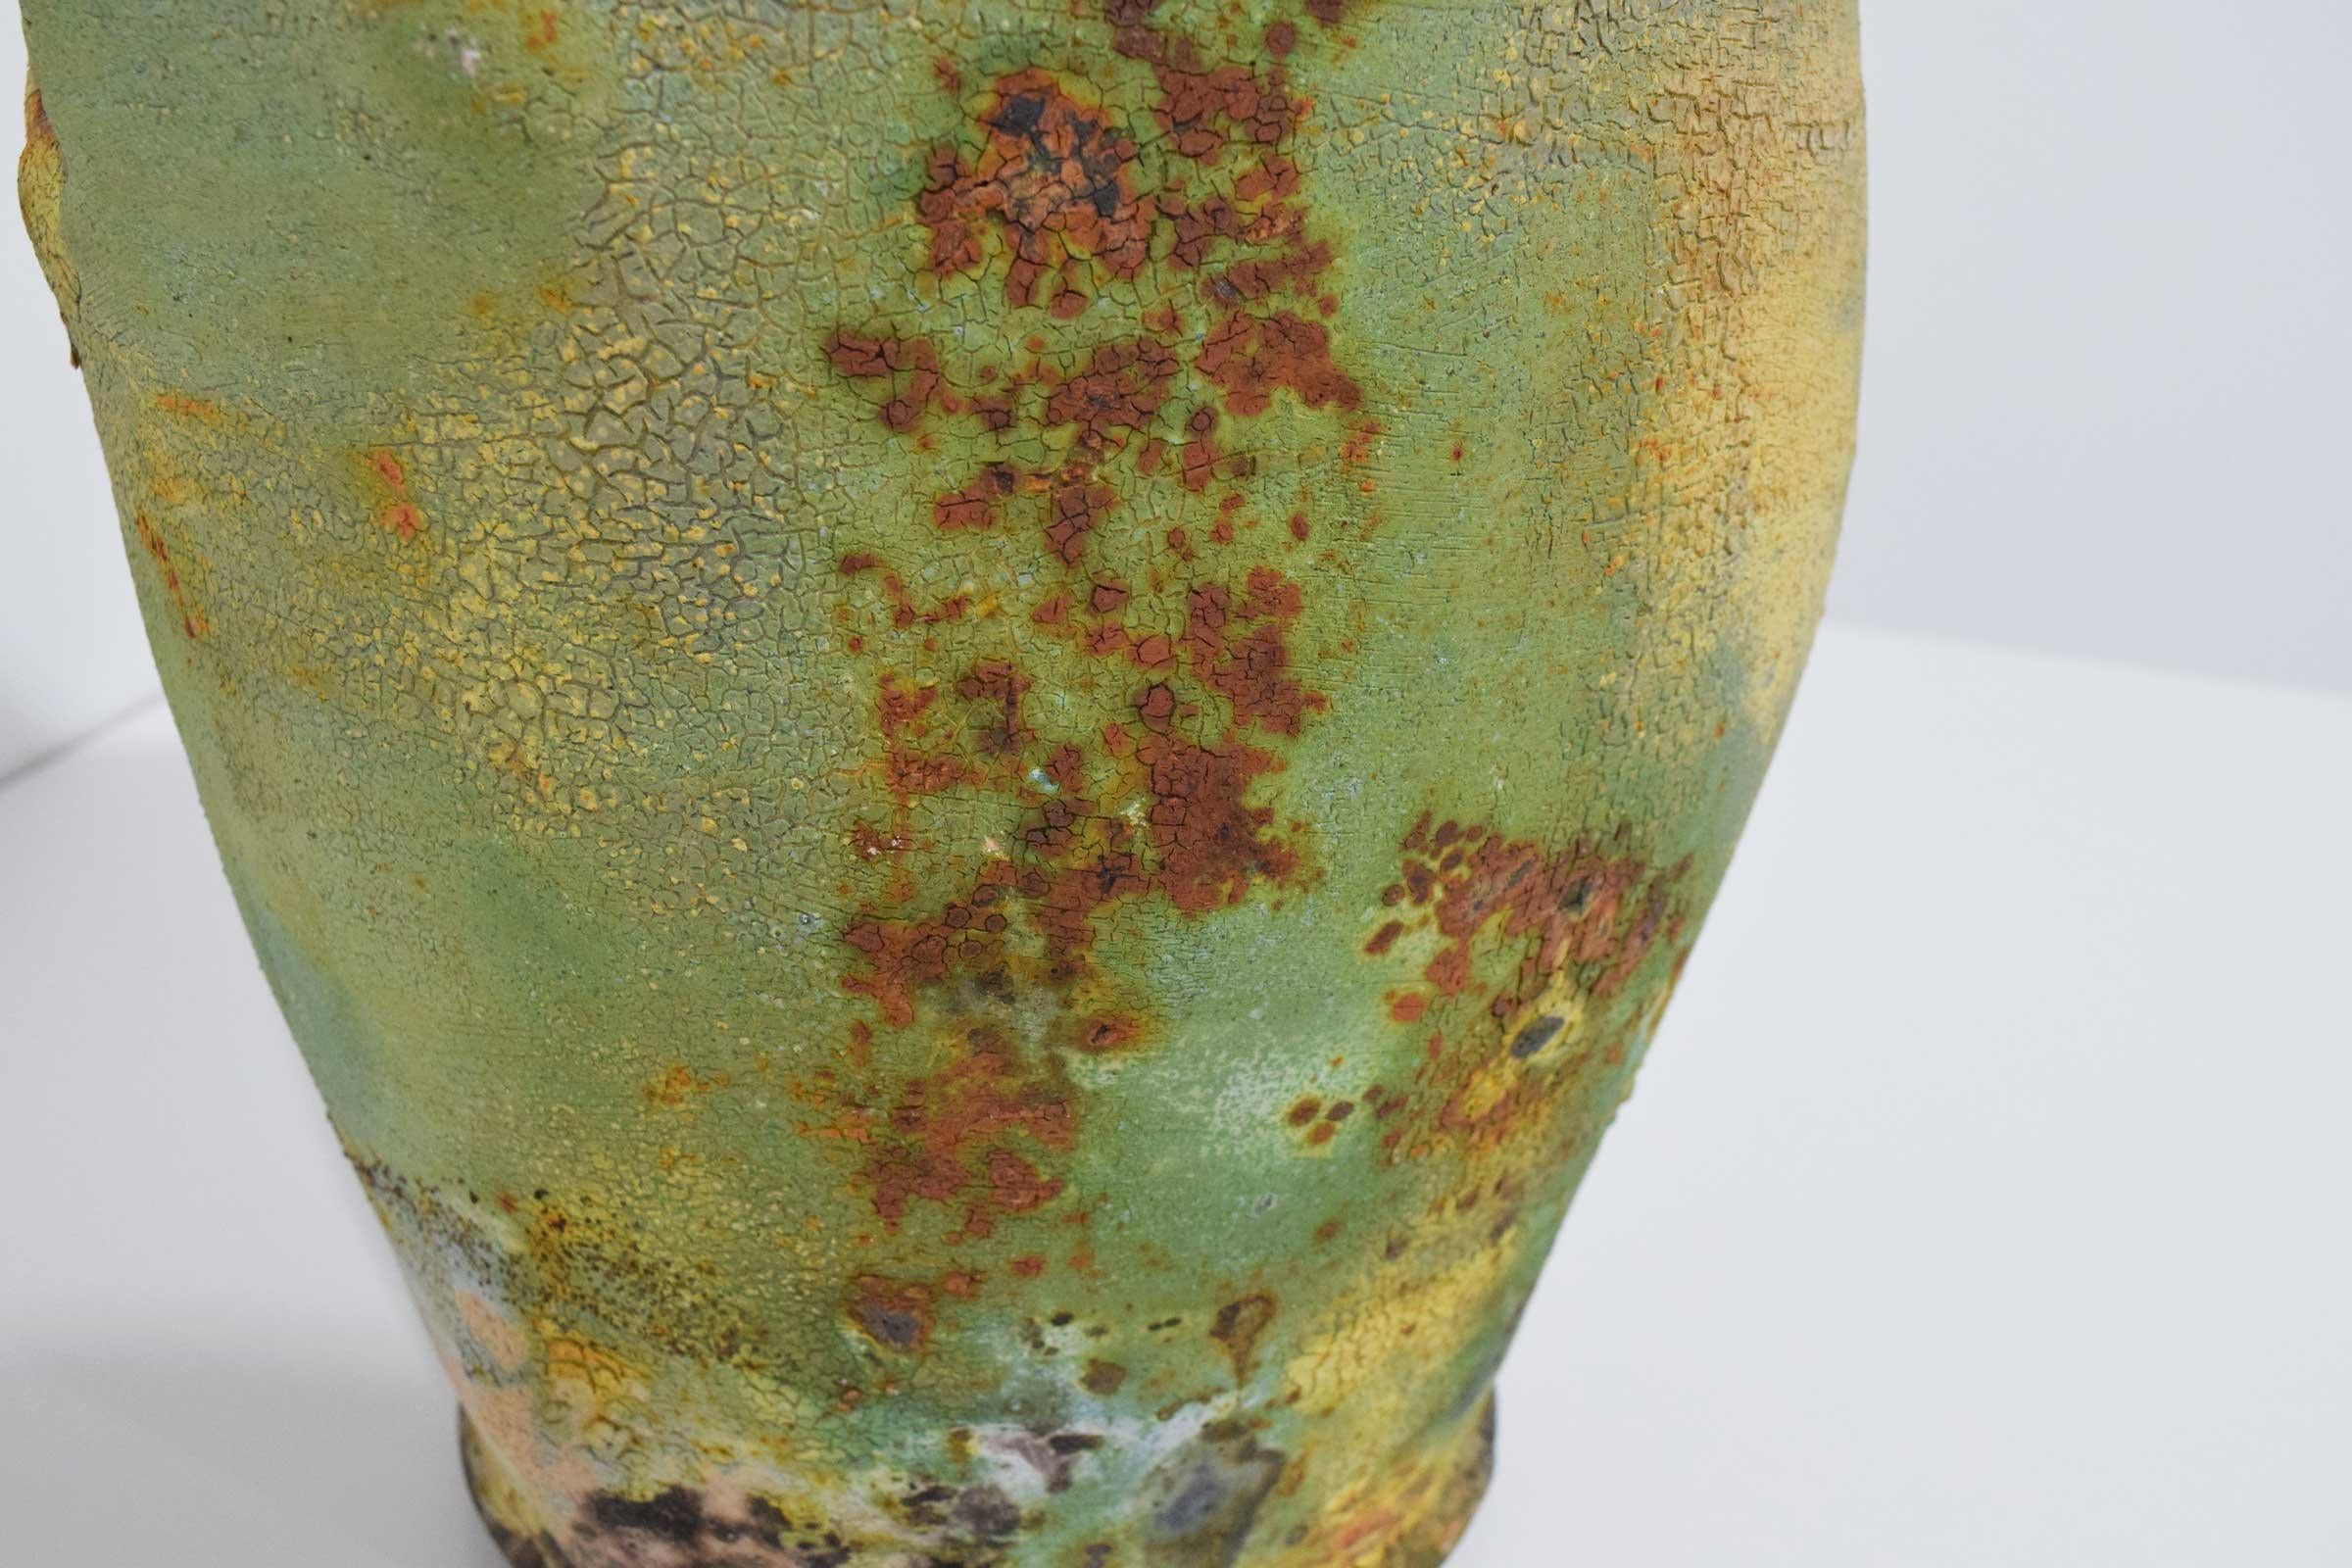 Beautiful organic shape and style, vessel appears aged and has multiple colors and textures.
Kris Cox
Born in Los Angeles, California, 1951
M.F.A., Rhode Island School of Design, Providence, Rhode Island, 1977
B.A., Claremont McKenna College,